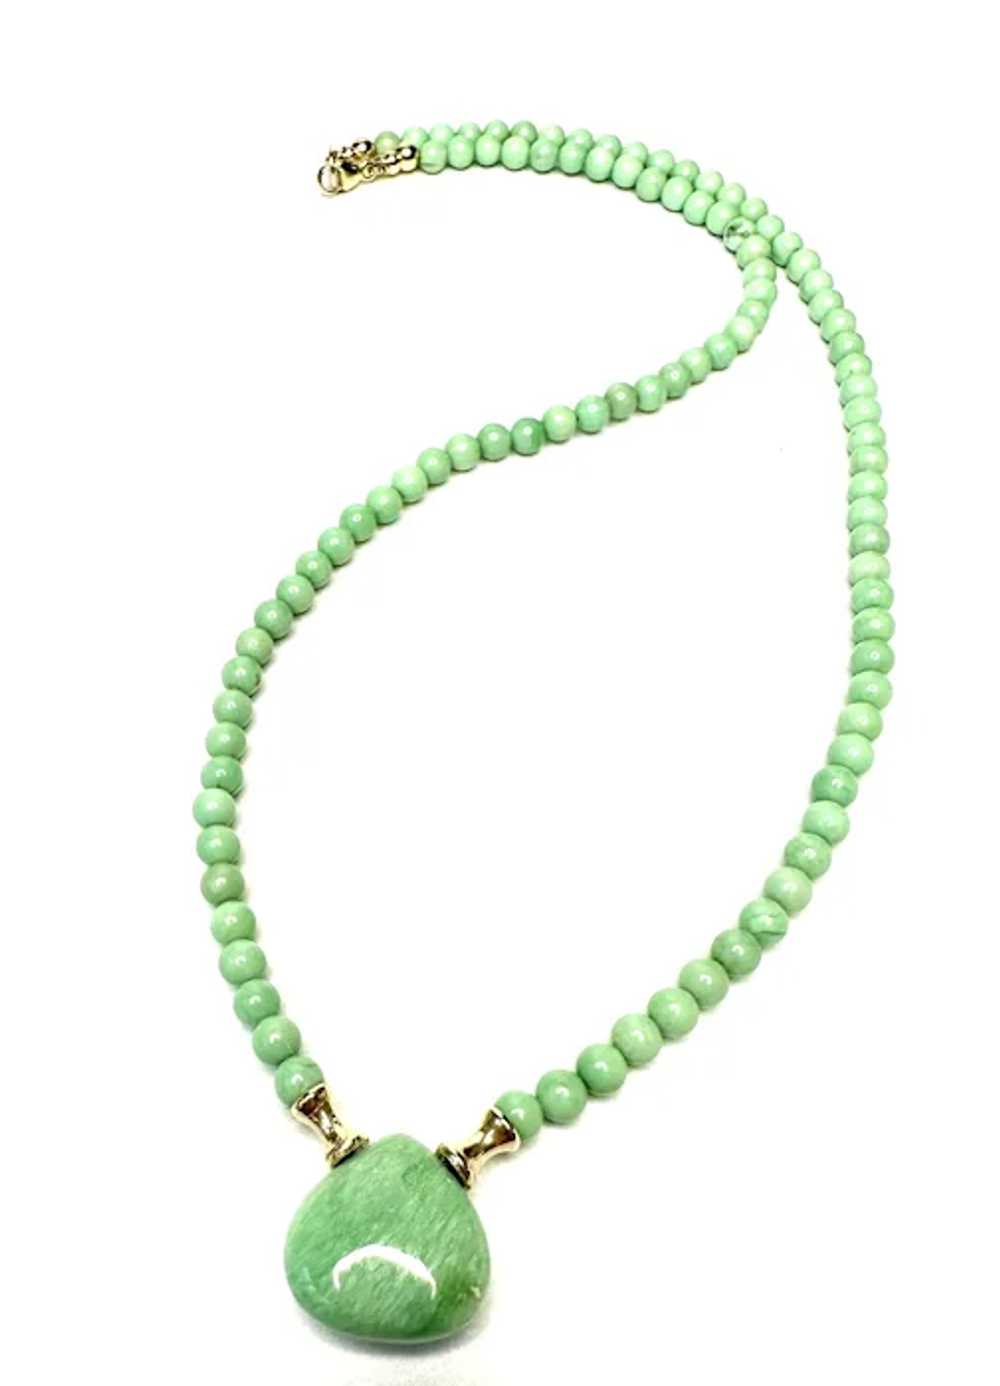 Green Variscite, and 14k Gold Necklace - image 3